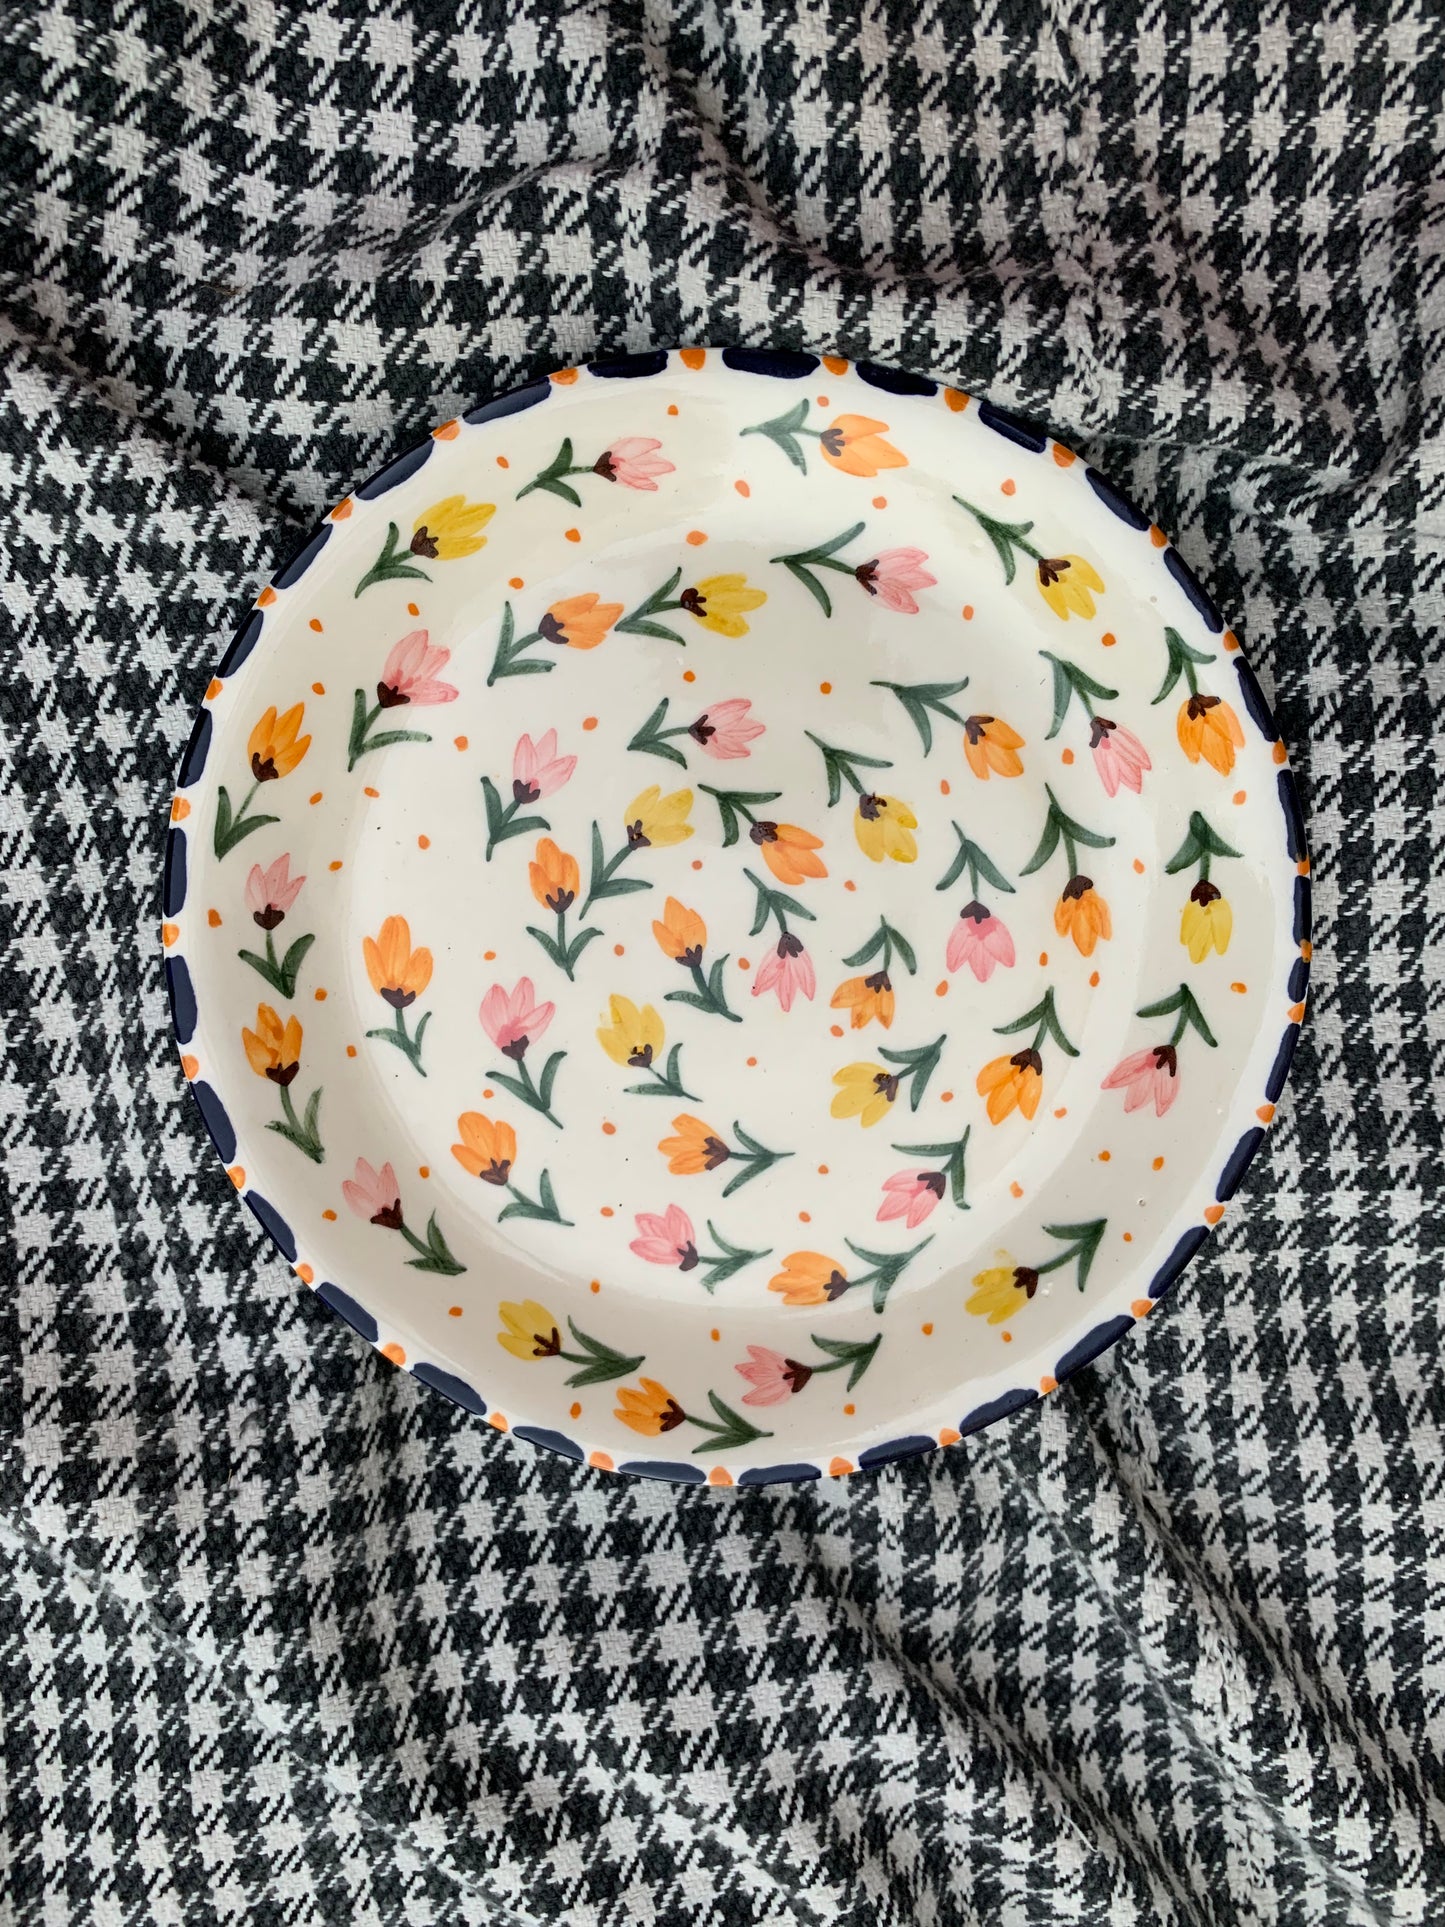 Floral Circle Plate